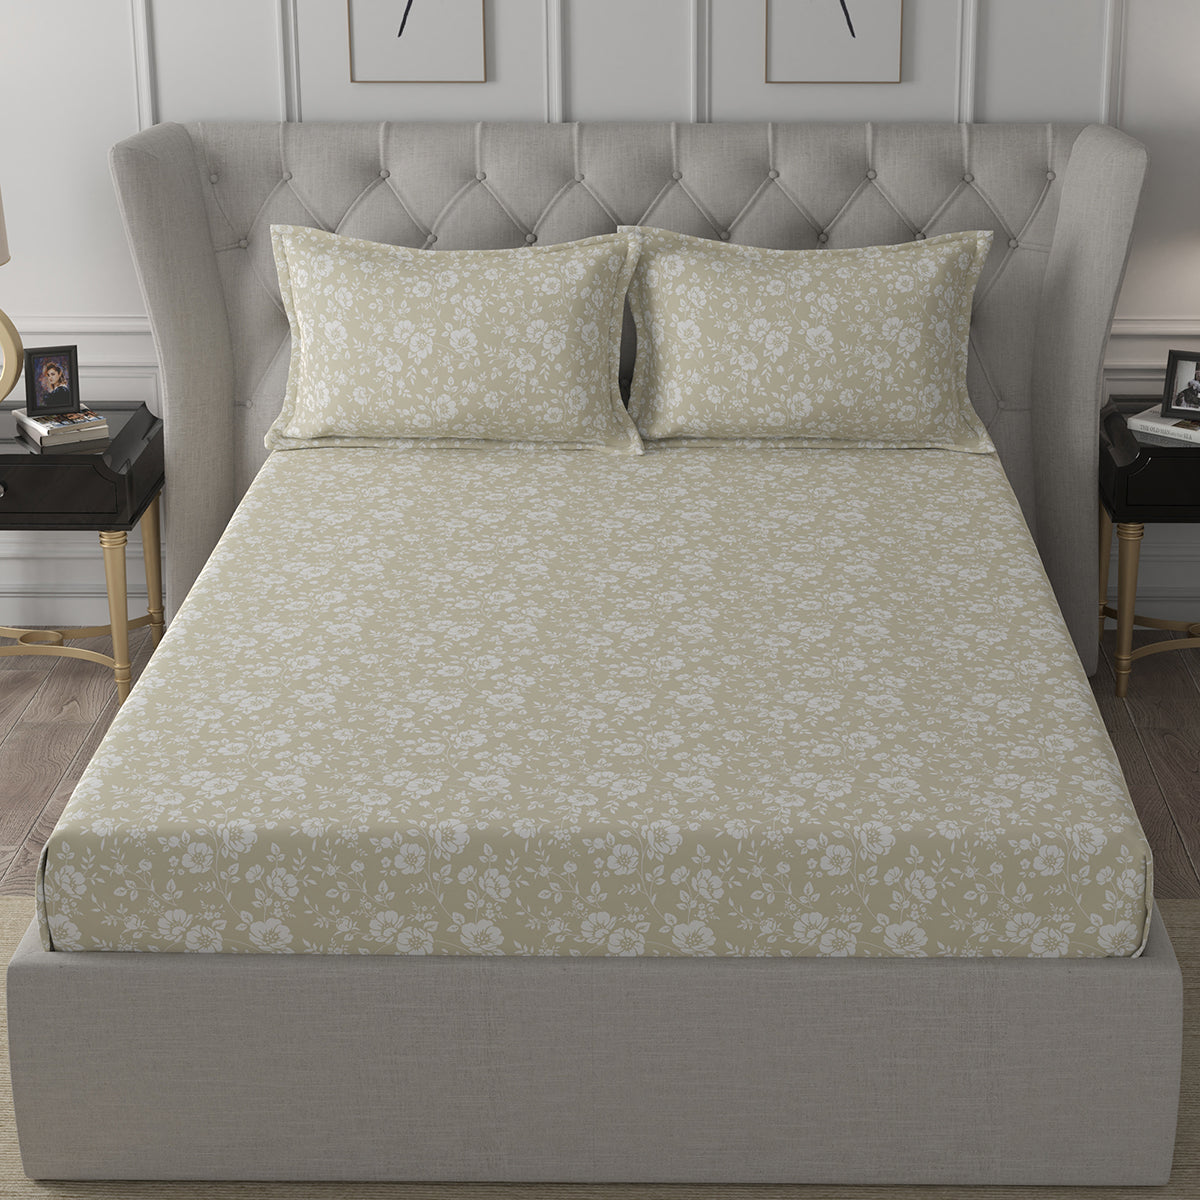 Ardour Cicely Printed Bed Sheet With Pillow Case